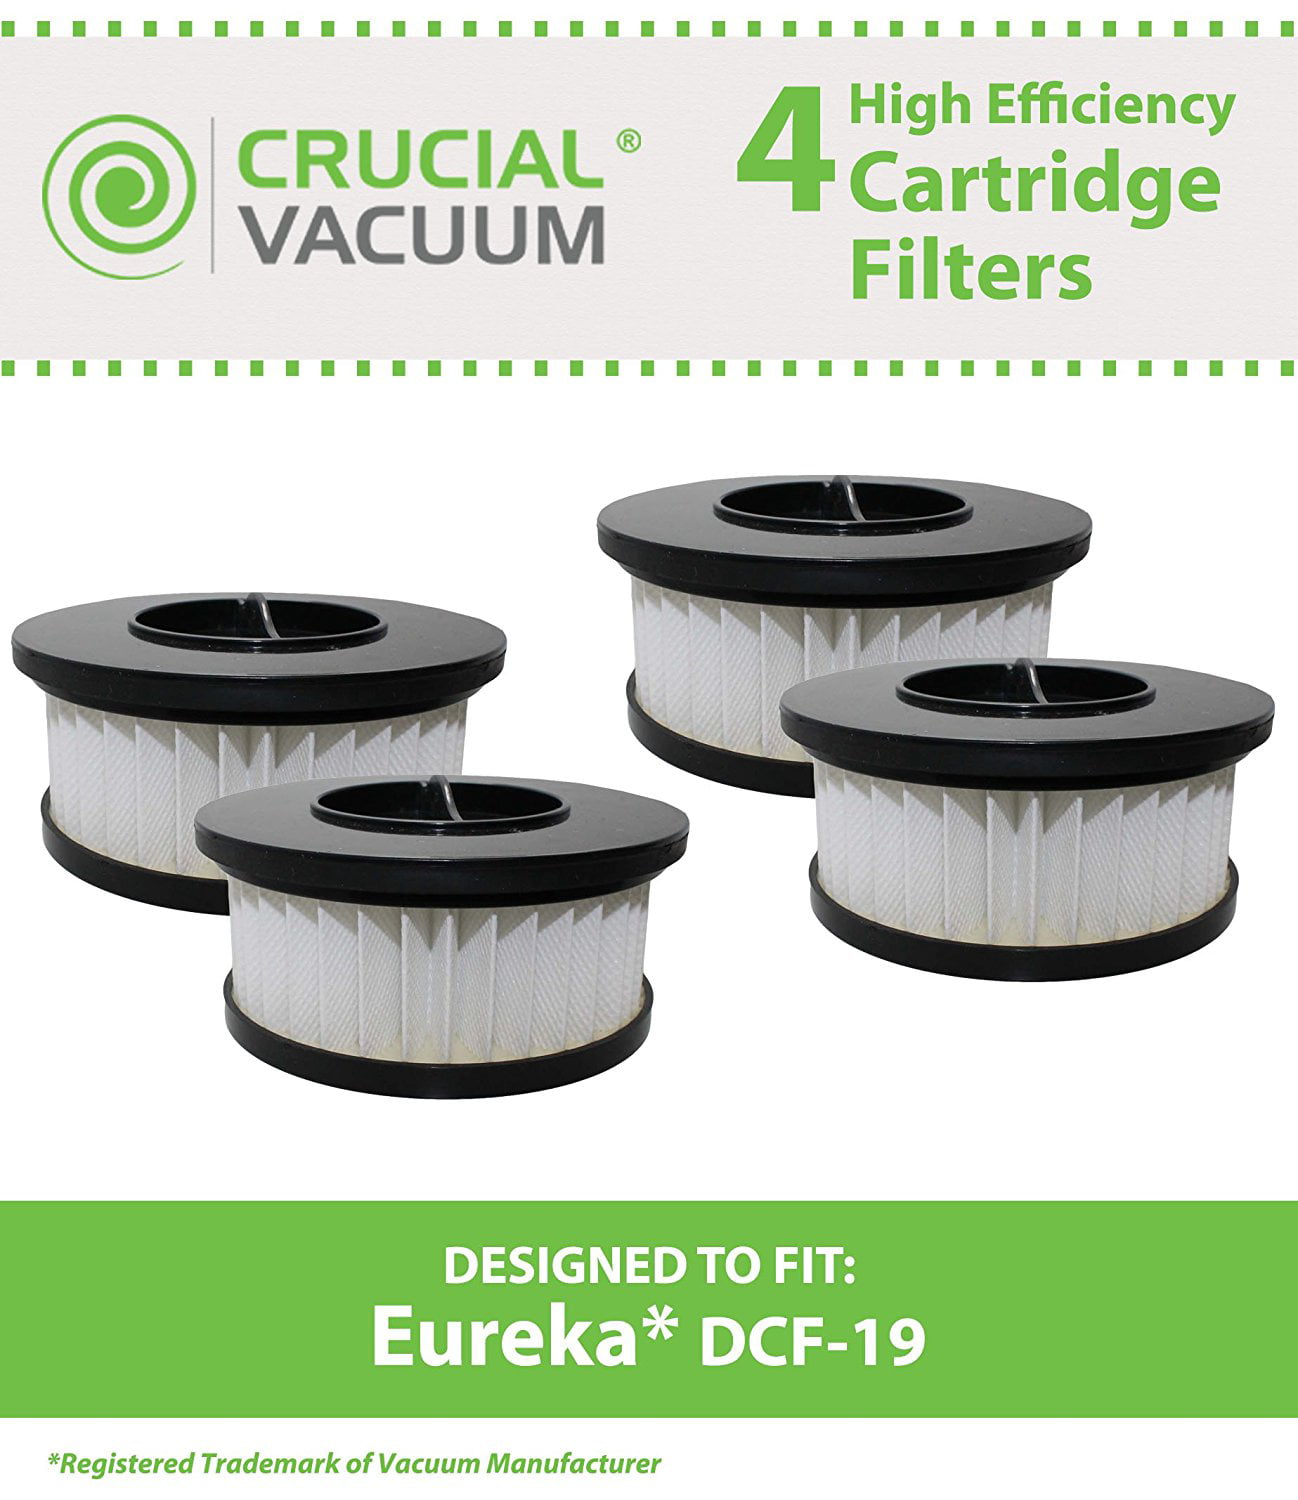 Compare to Part # 63950 Designed & Engineered By Crucial Vacuum 2 Eureka DCF19 Allergen Cartridge Filter Designed to Fit Eureka Boss Whirlwind Lite 450 Series Upright Vacuums